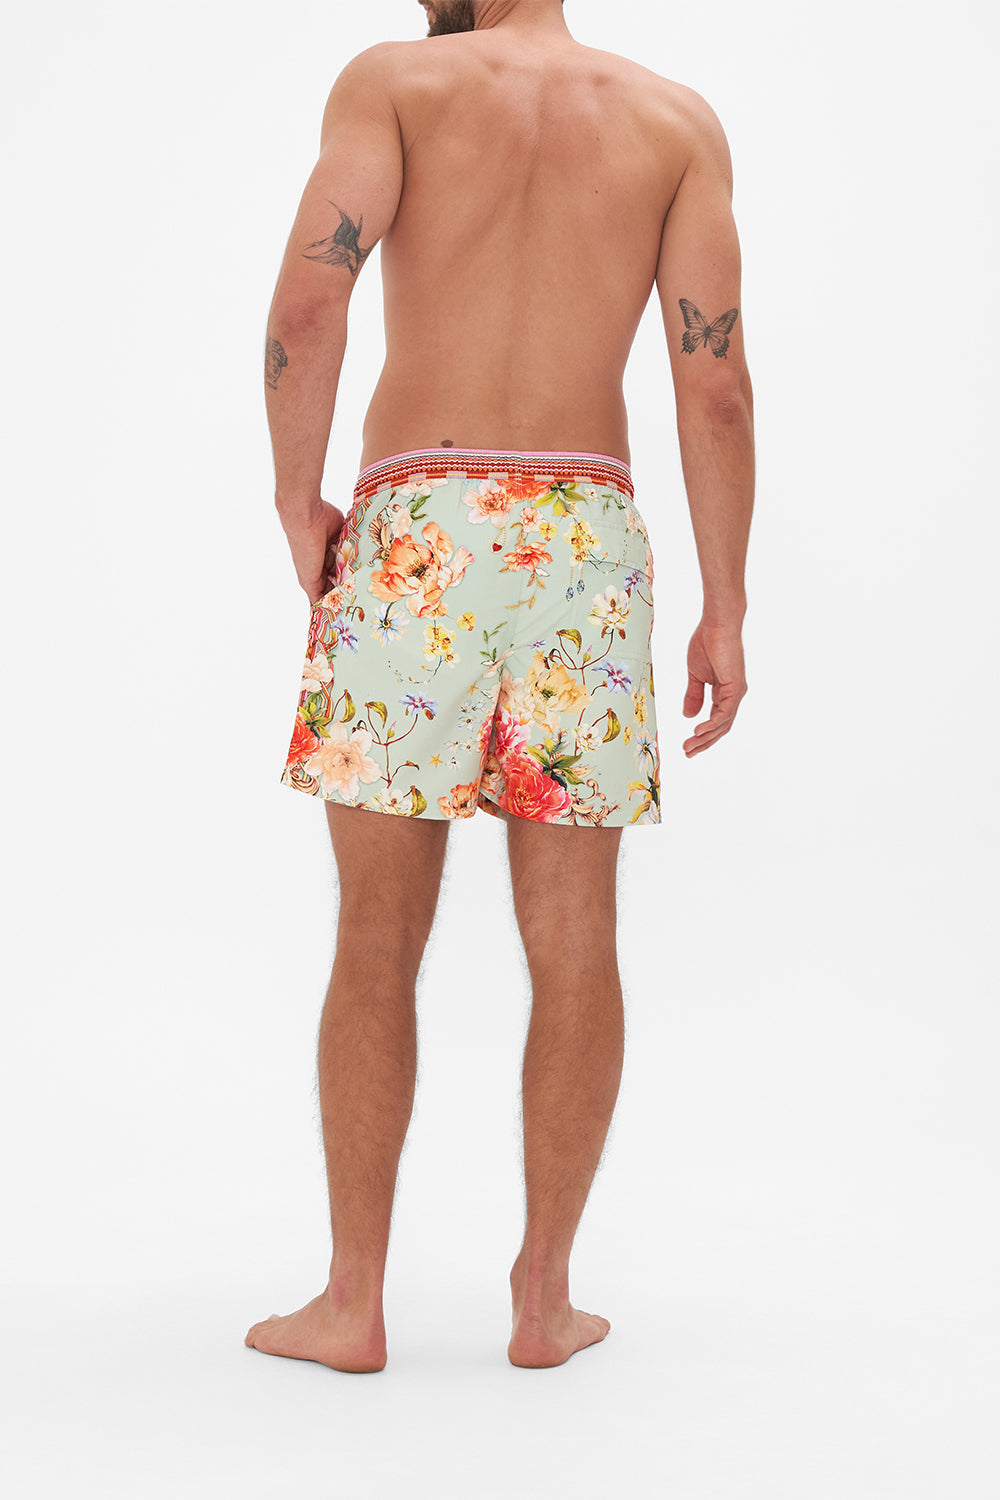 Back view of model wearing Hotel Franks by CAMILLA mens floral print boardshorts in Talk The Walk print